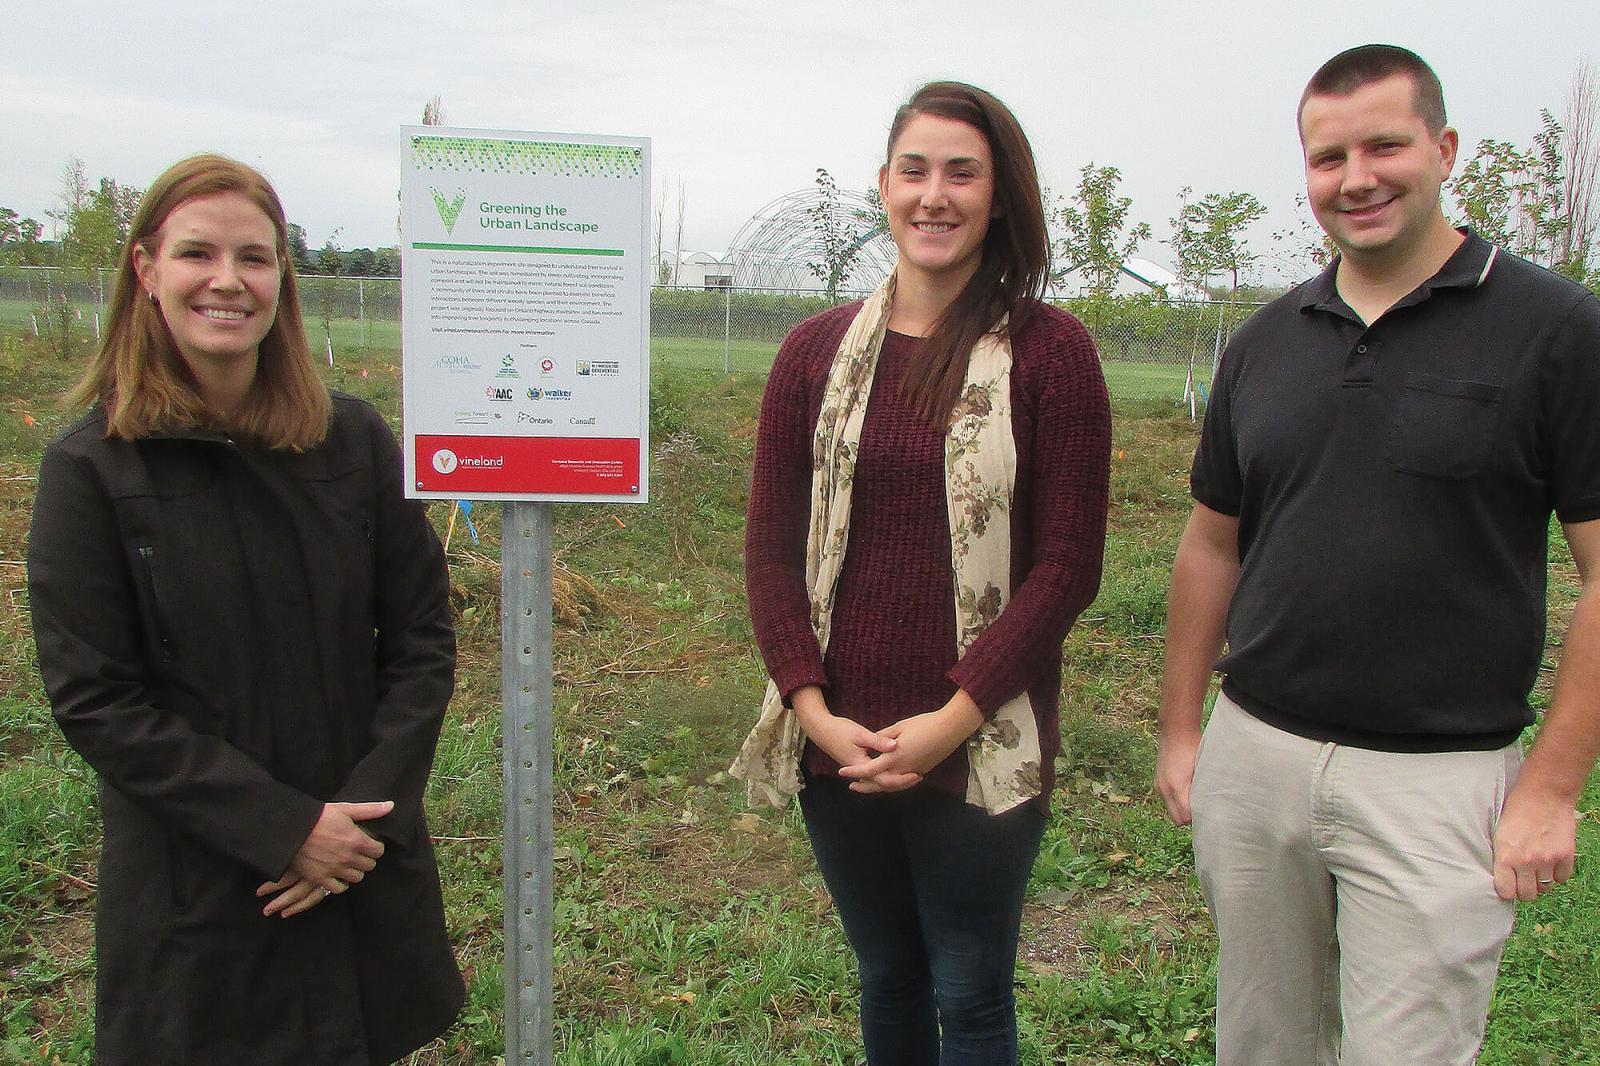 Dr. Darby McGrath, Vineland’s Research Scientist, Nursery and Landscape, is joined by her assistants with the highway trees project, Erin Agro, Research Technician, Horticultural Production Systems, and Jason Henry, Research Technician, Nursery and Landscape.